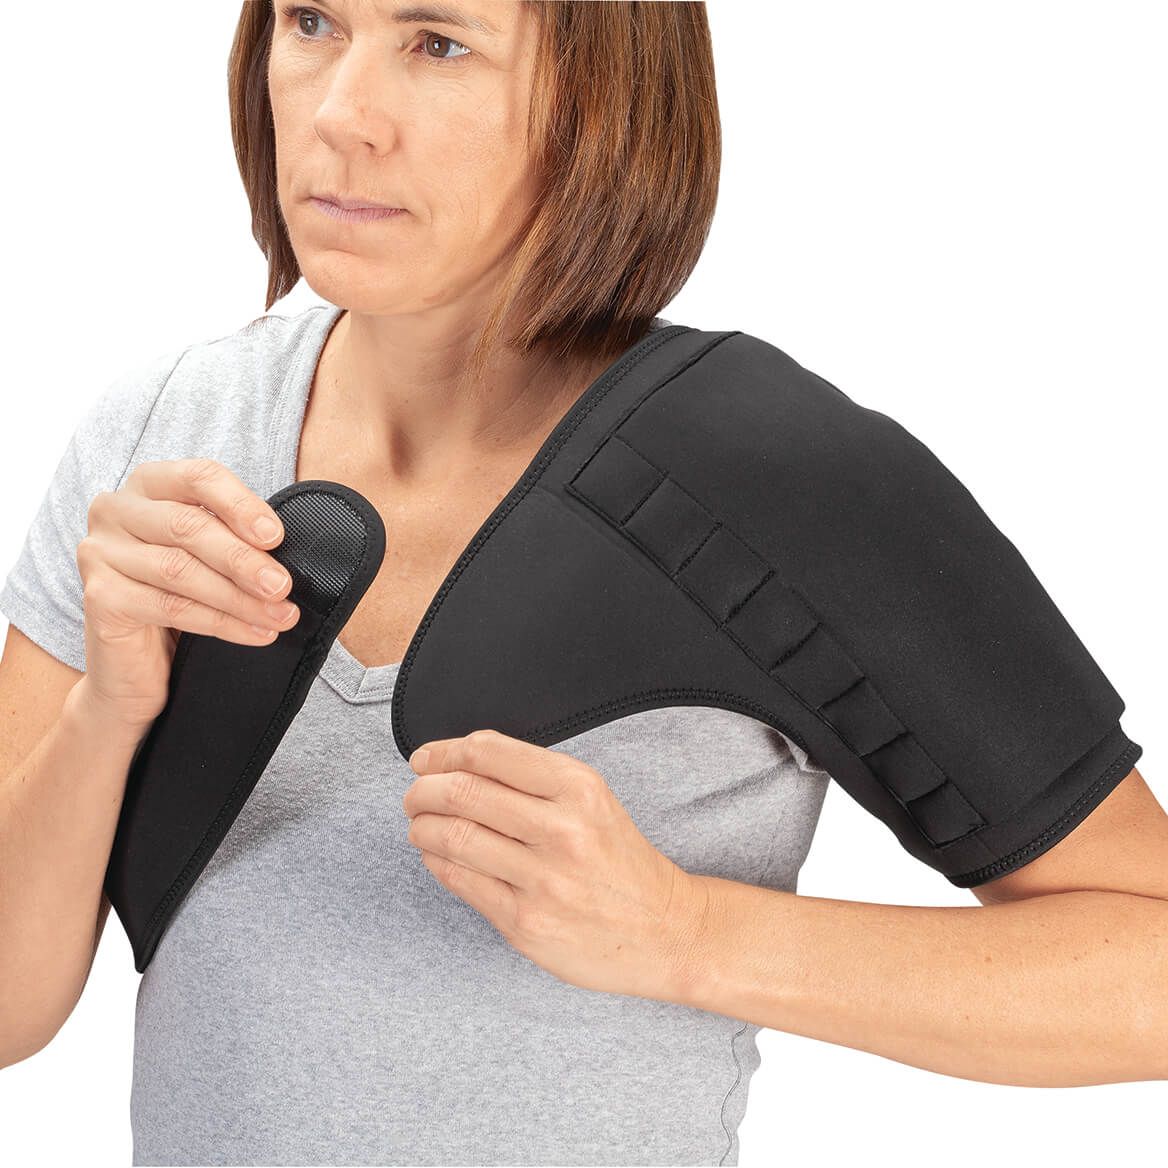 LivingSURE™ 7 in 1 Hot and Cold Magnetic Therapy Wrap + '-' + 373328